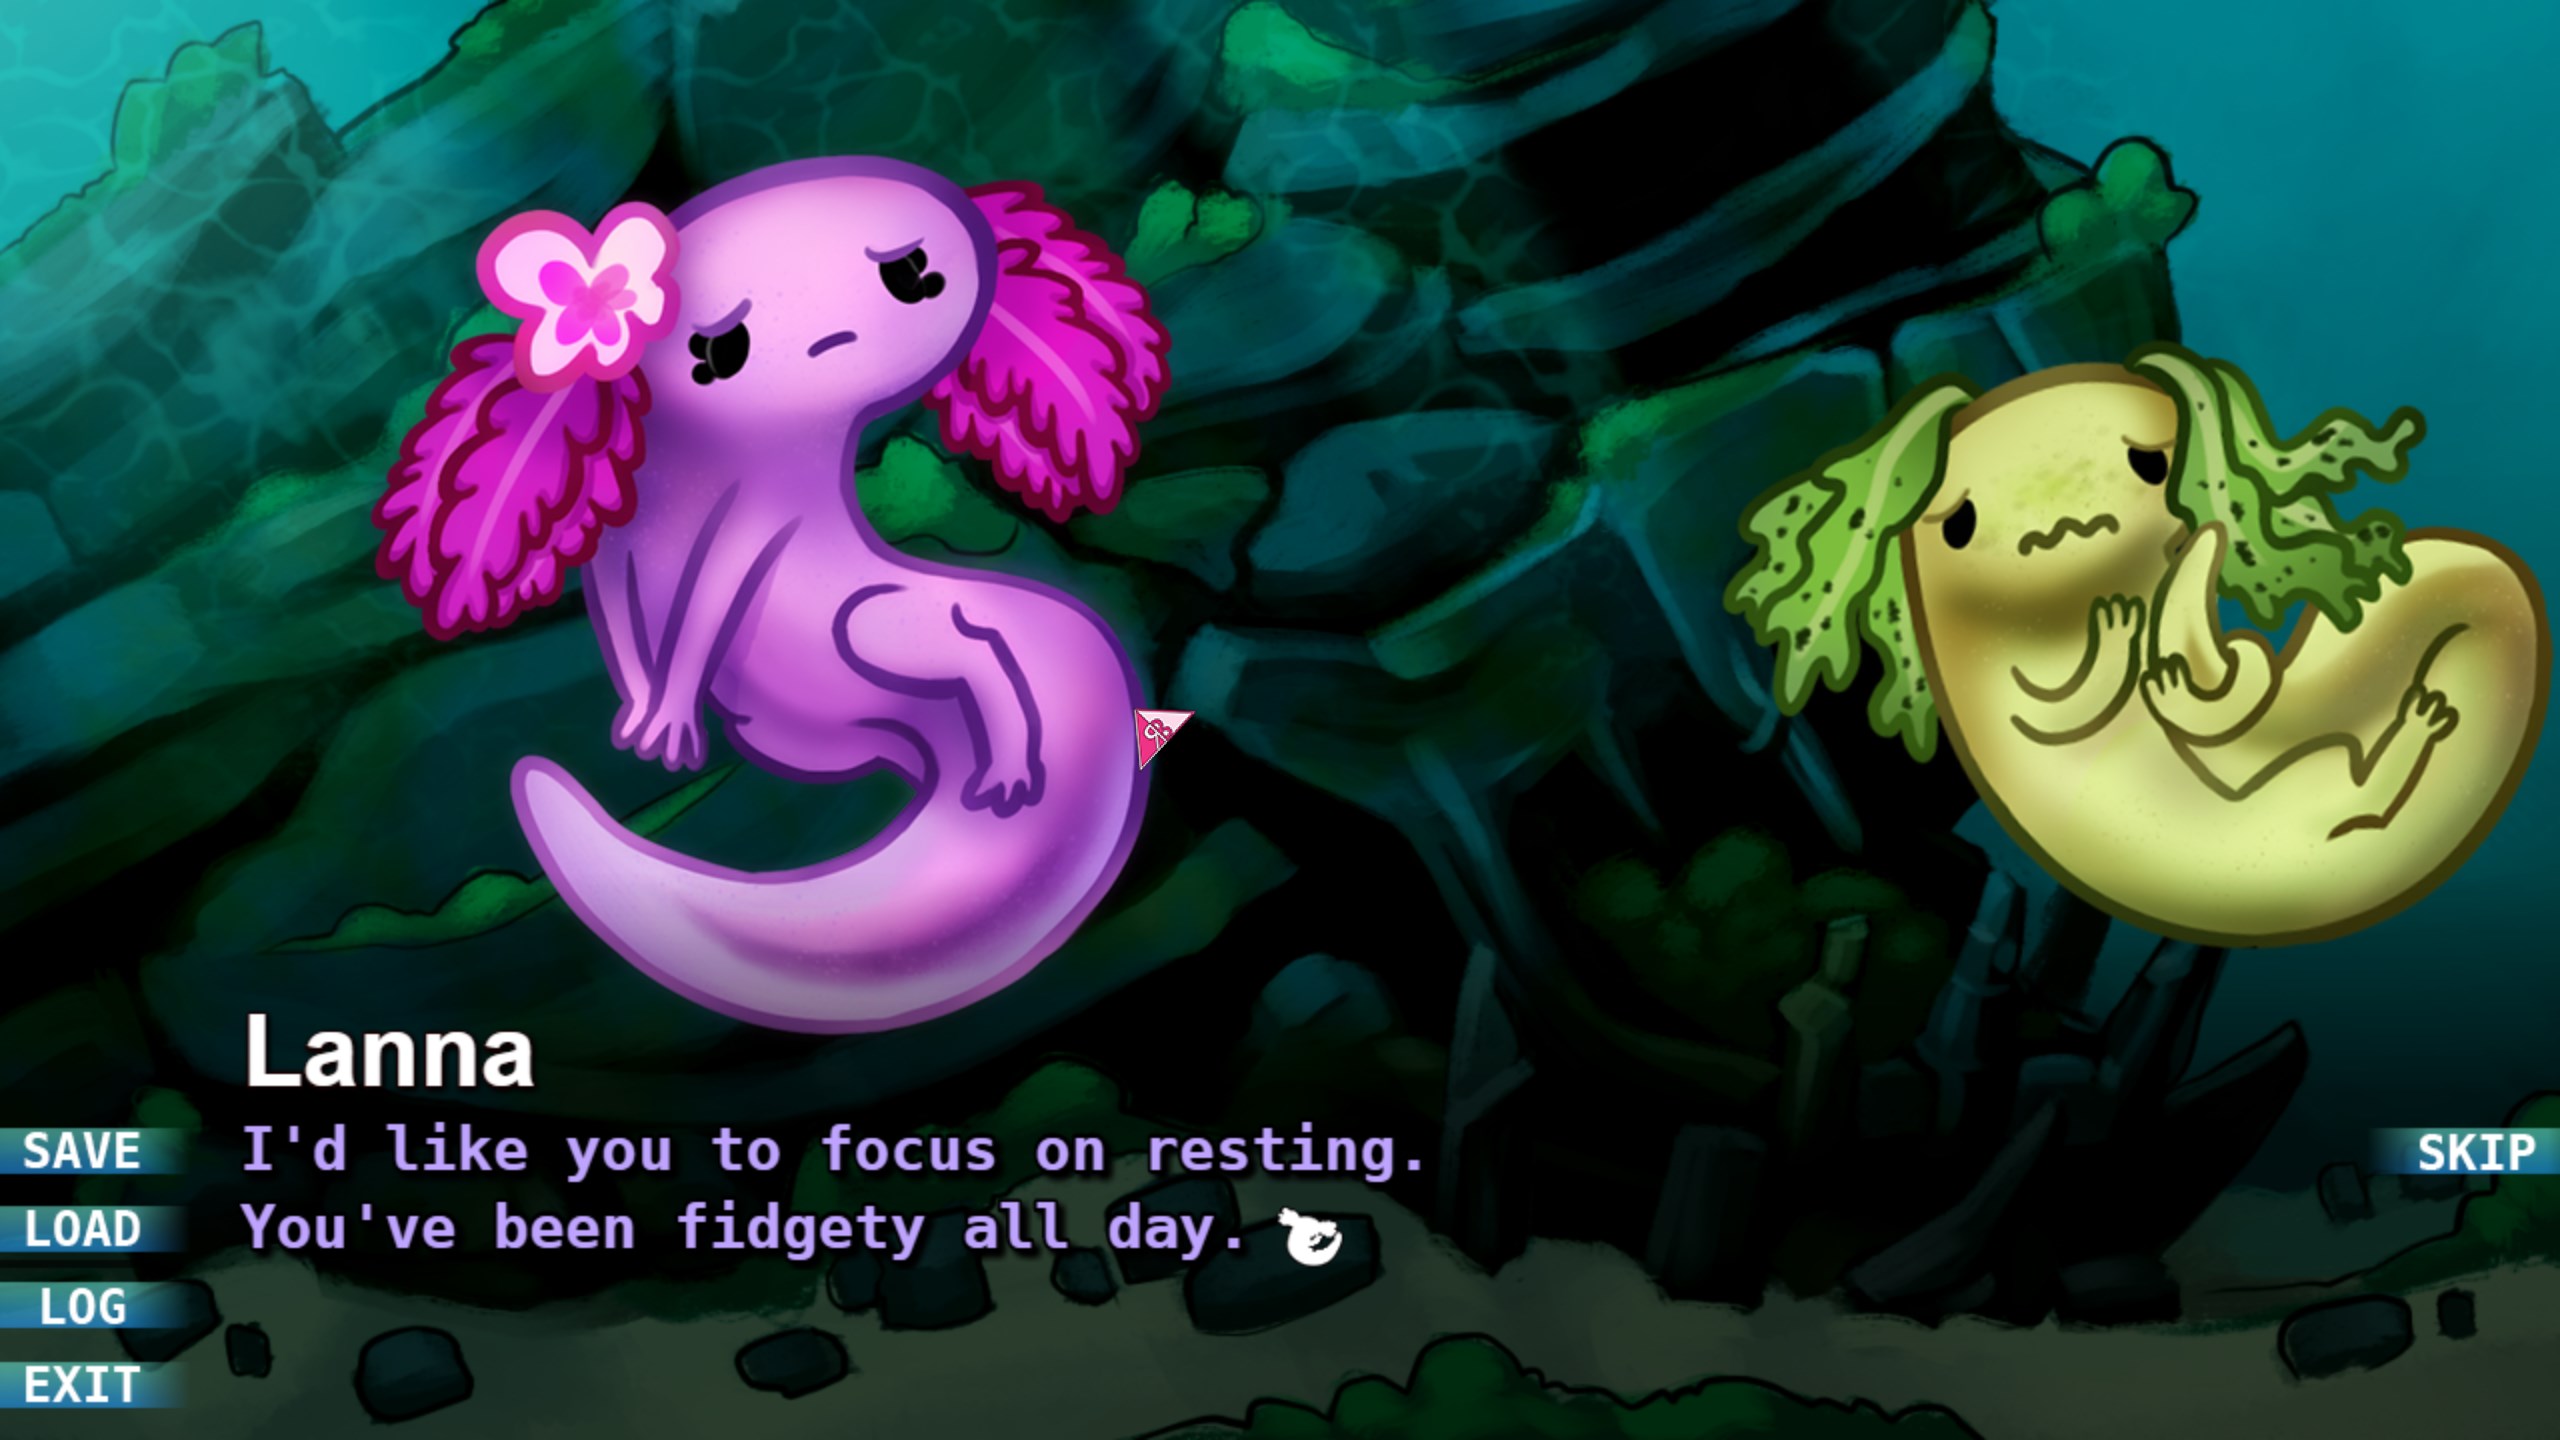 RB: Axolotl by Actawesome